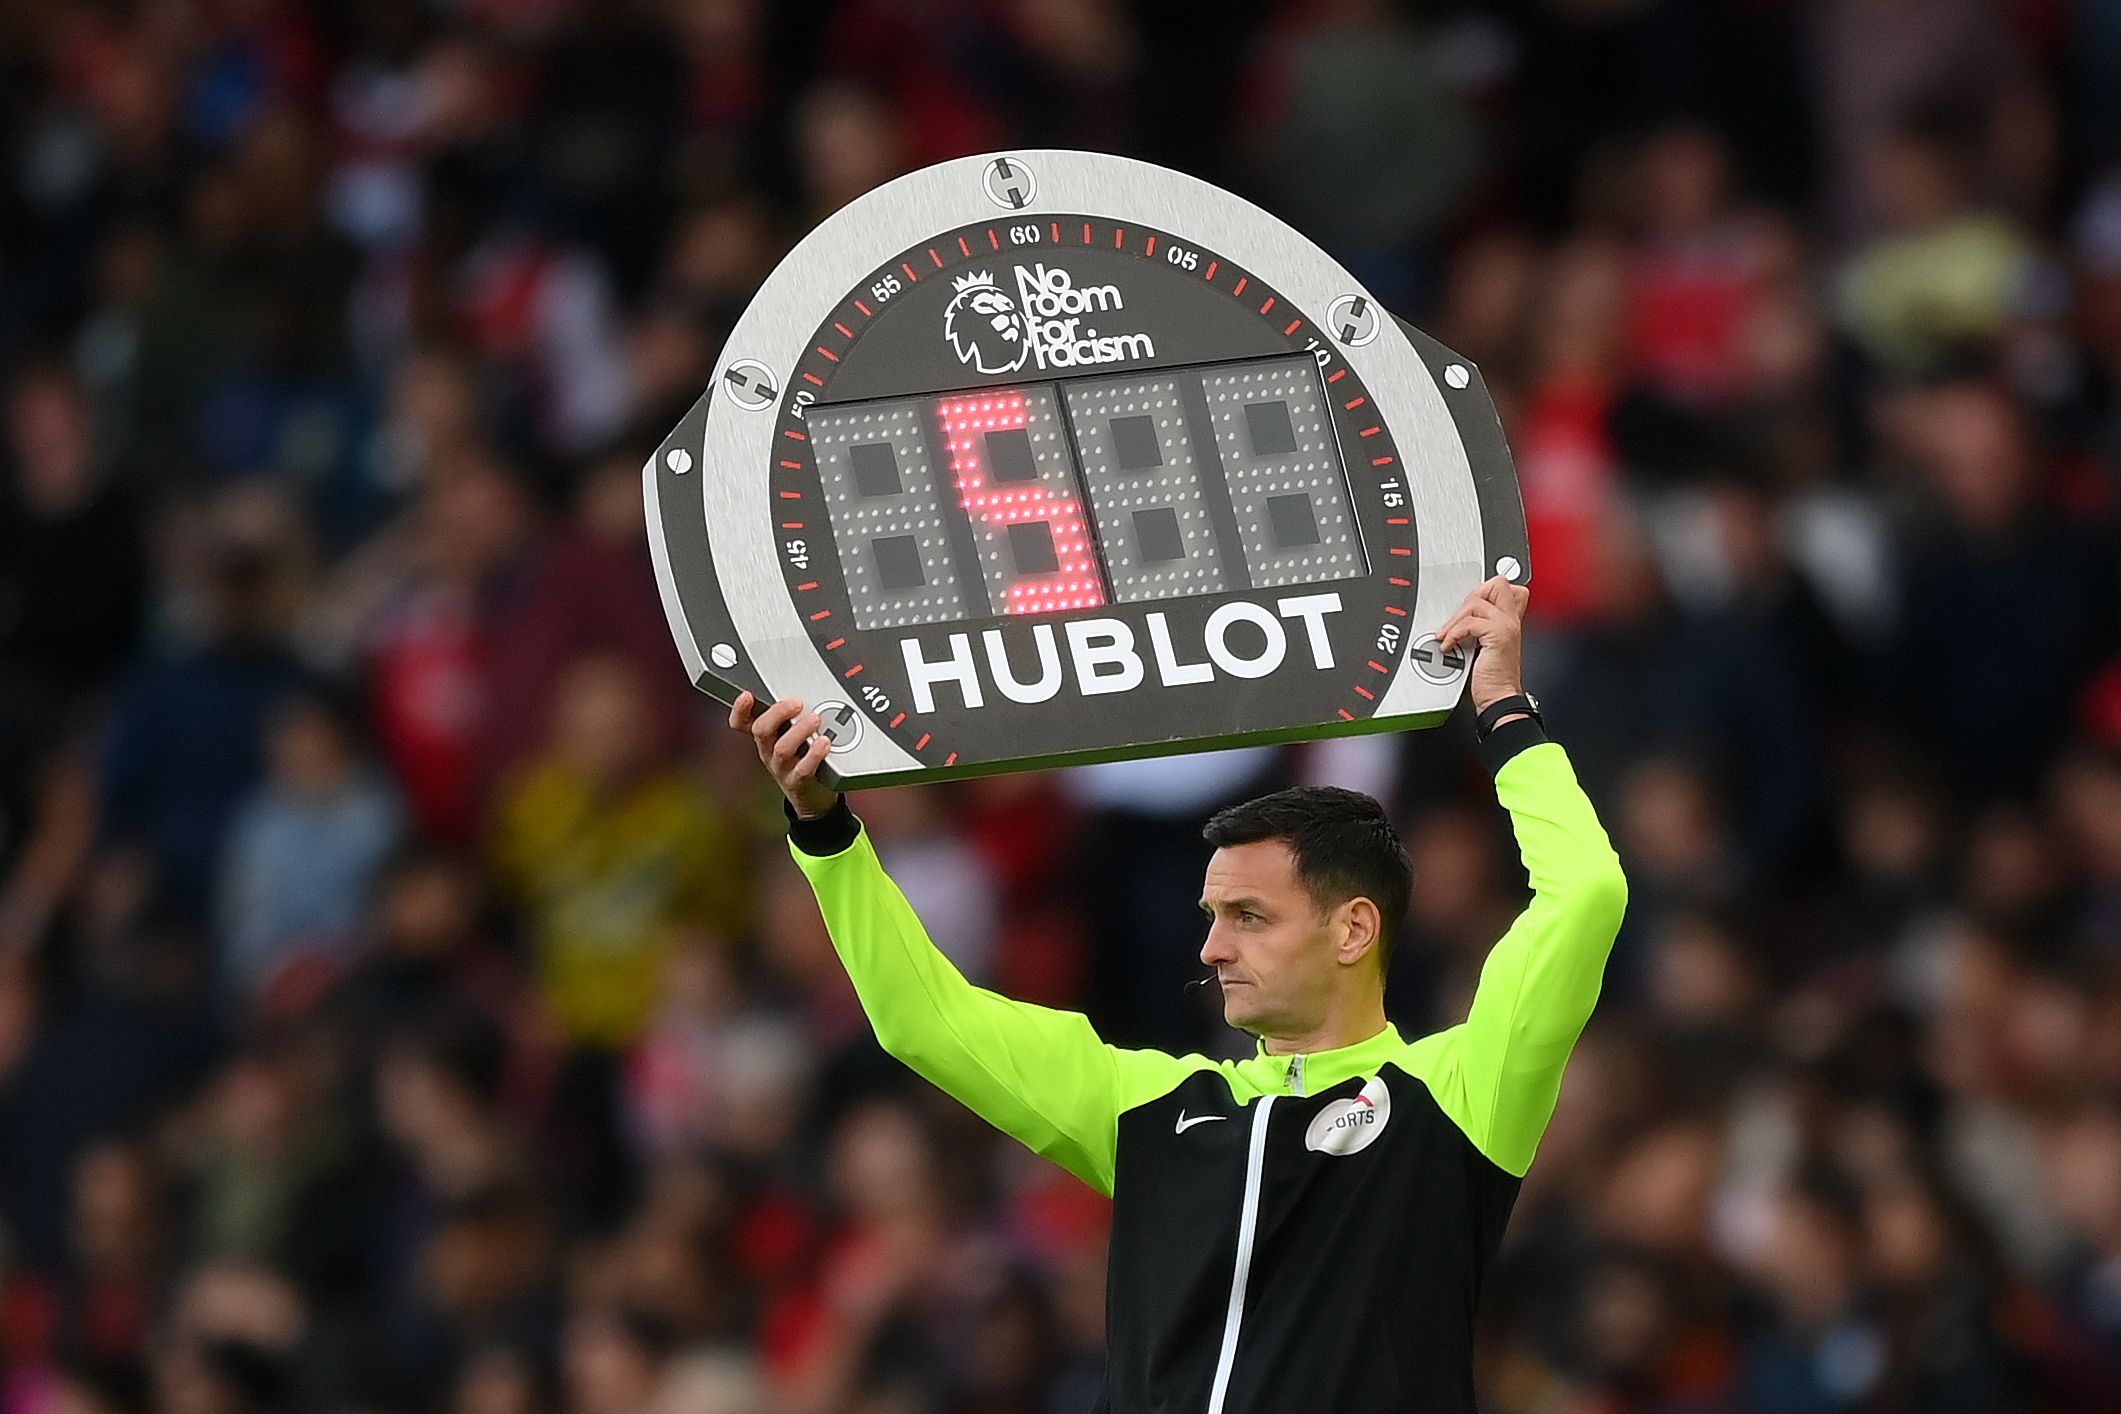 Fourth official adds on time in the Premier League